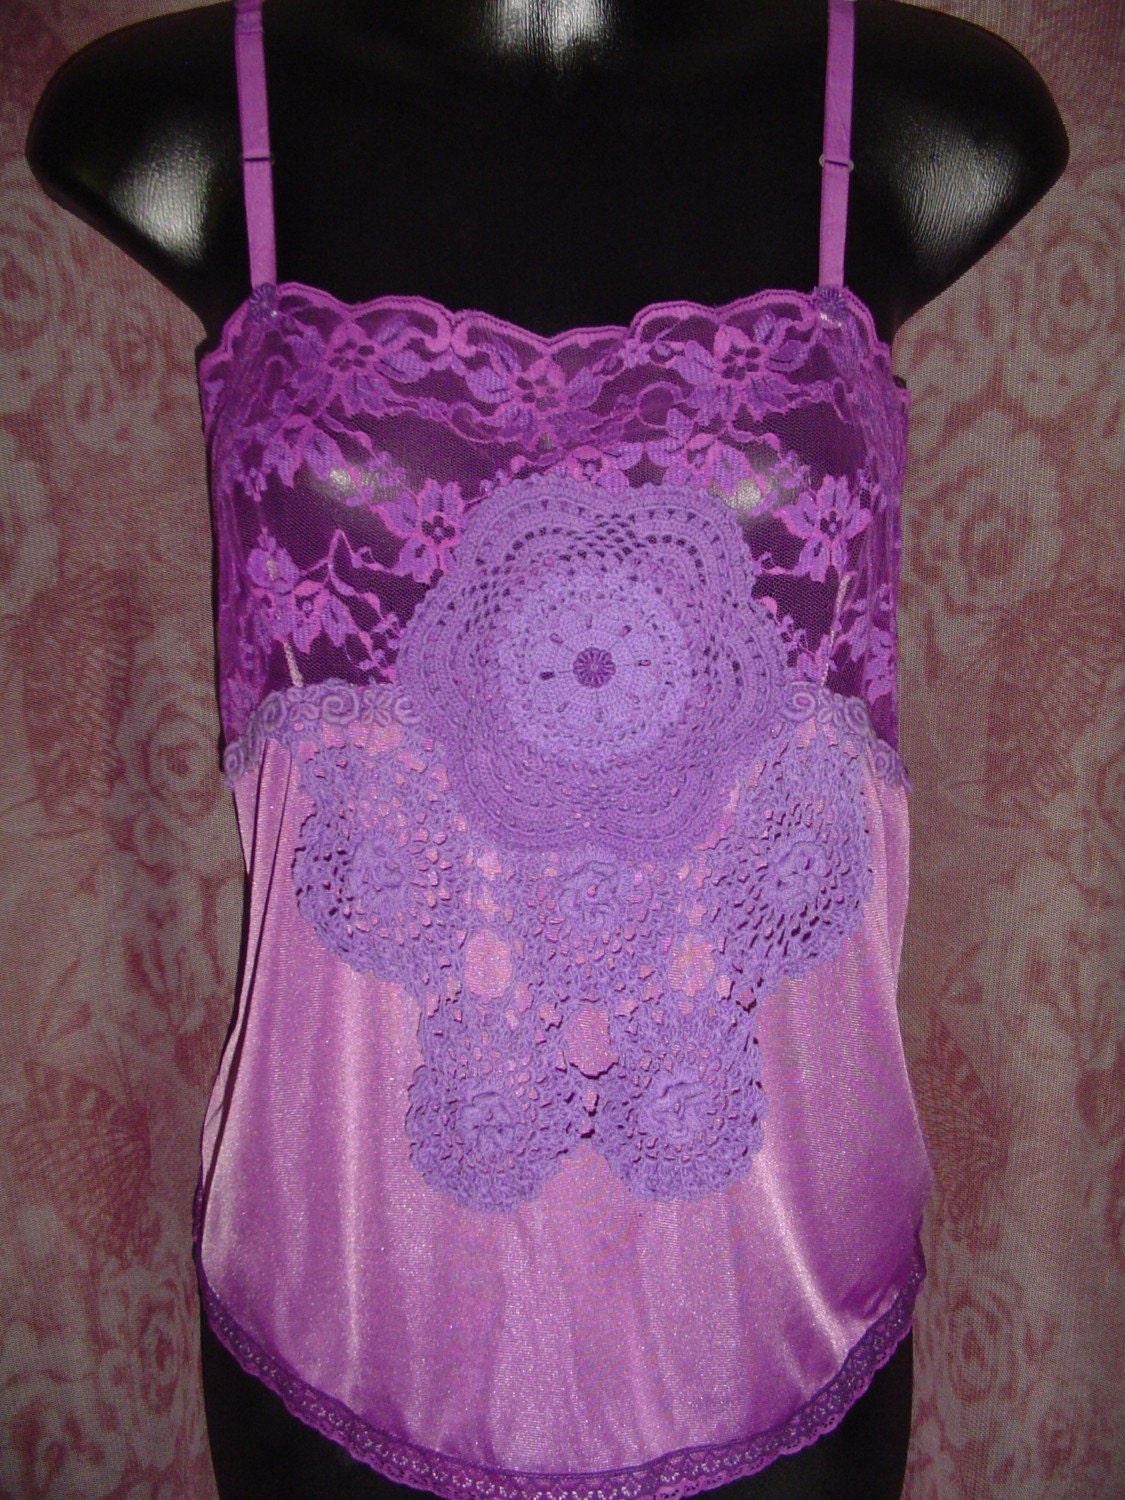 FREE SHIPPING - Purple Vintage Camisole Slip Top